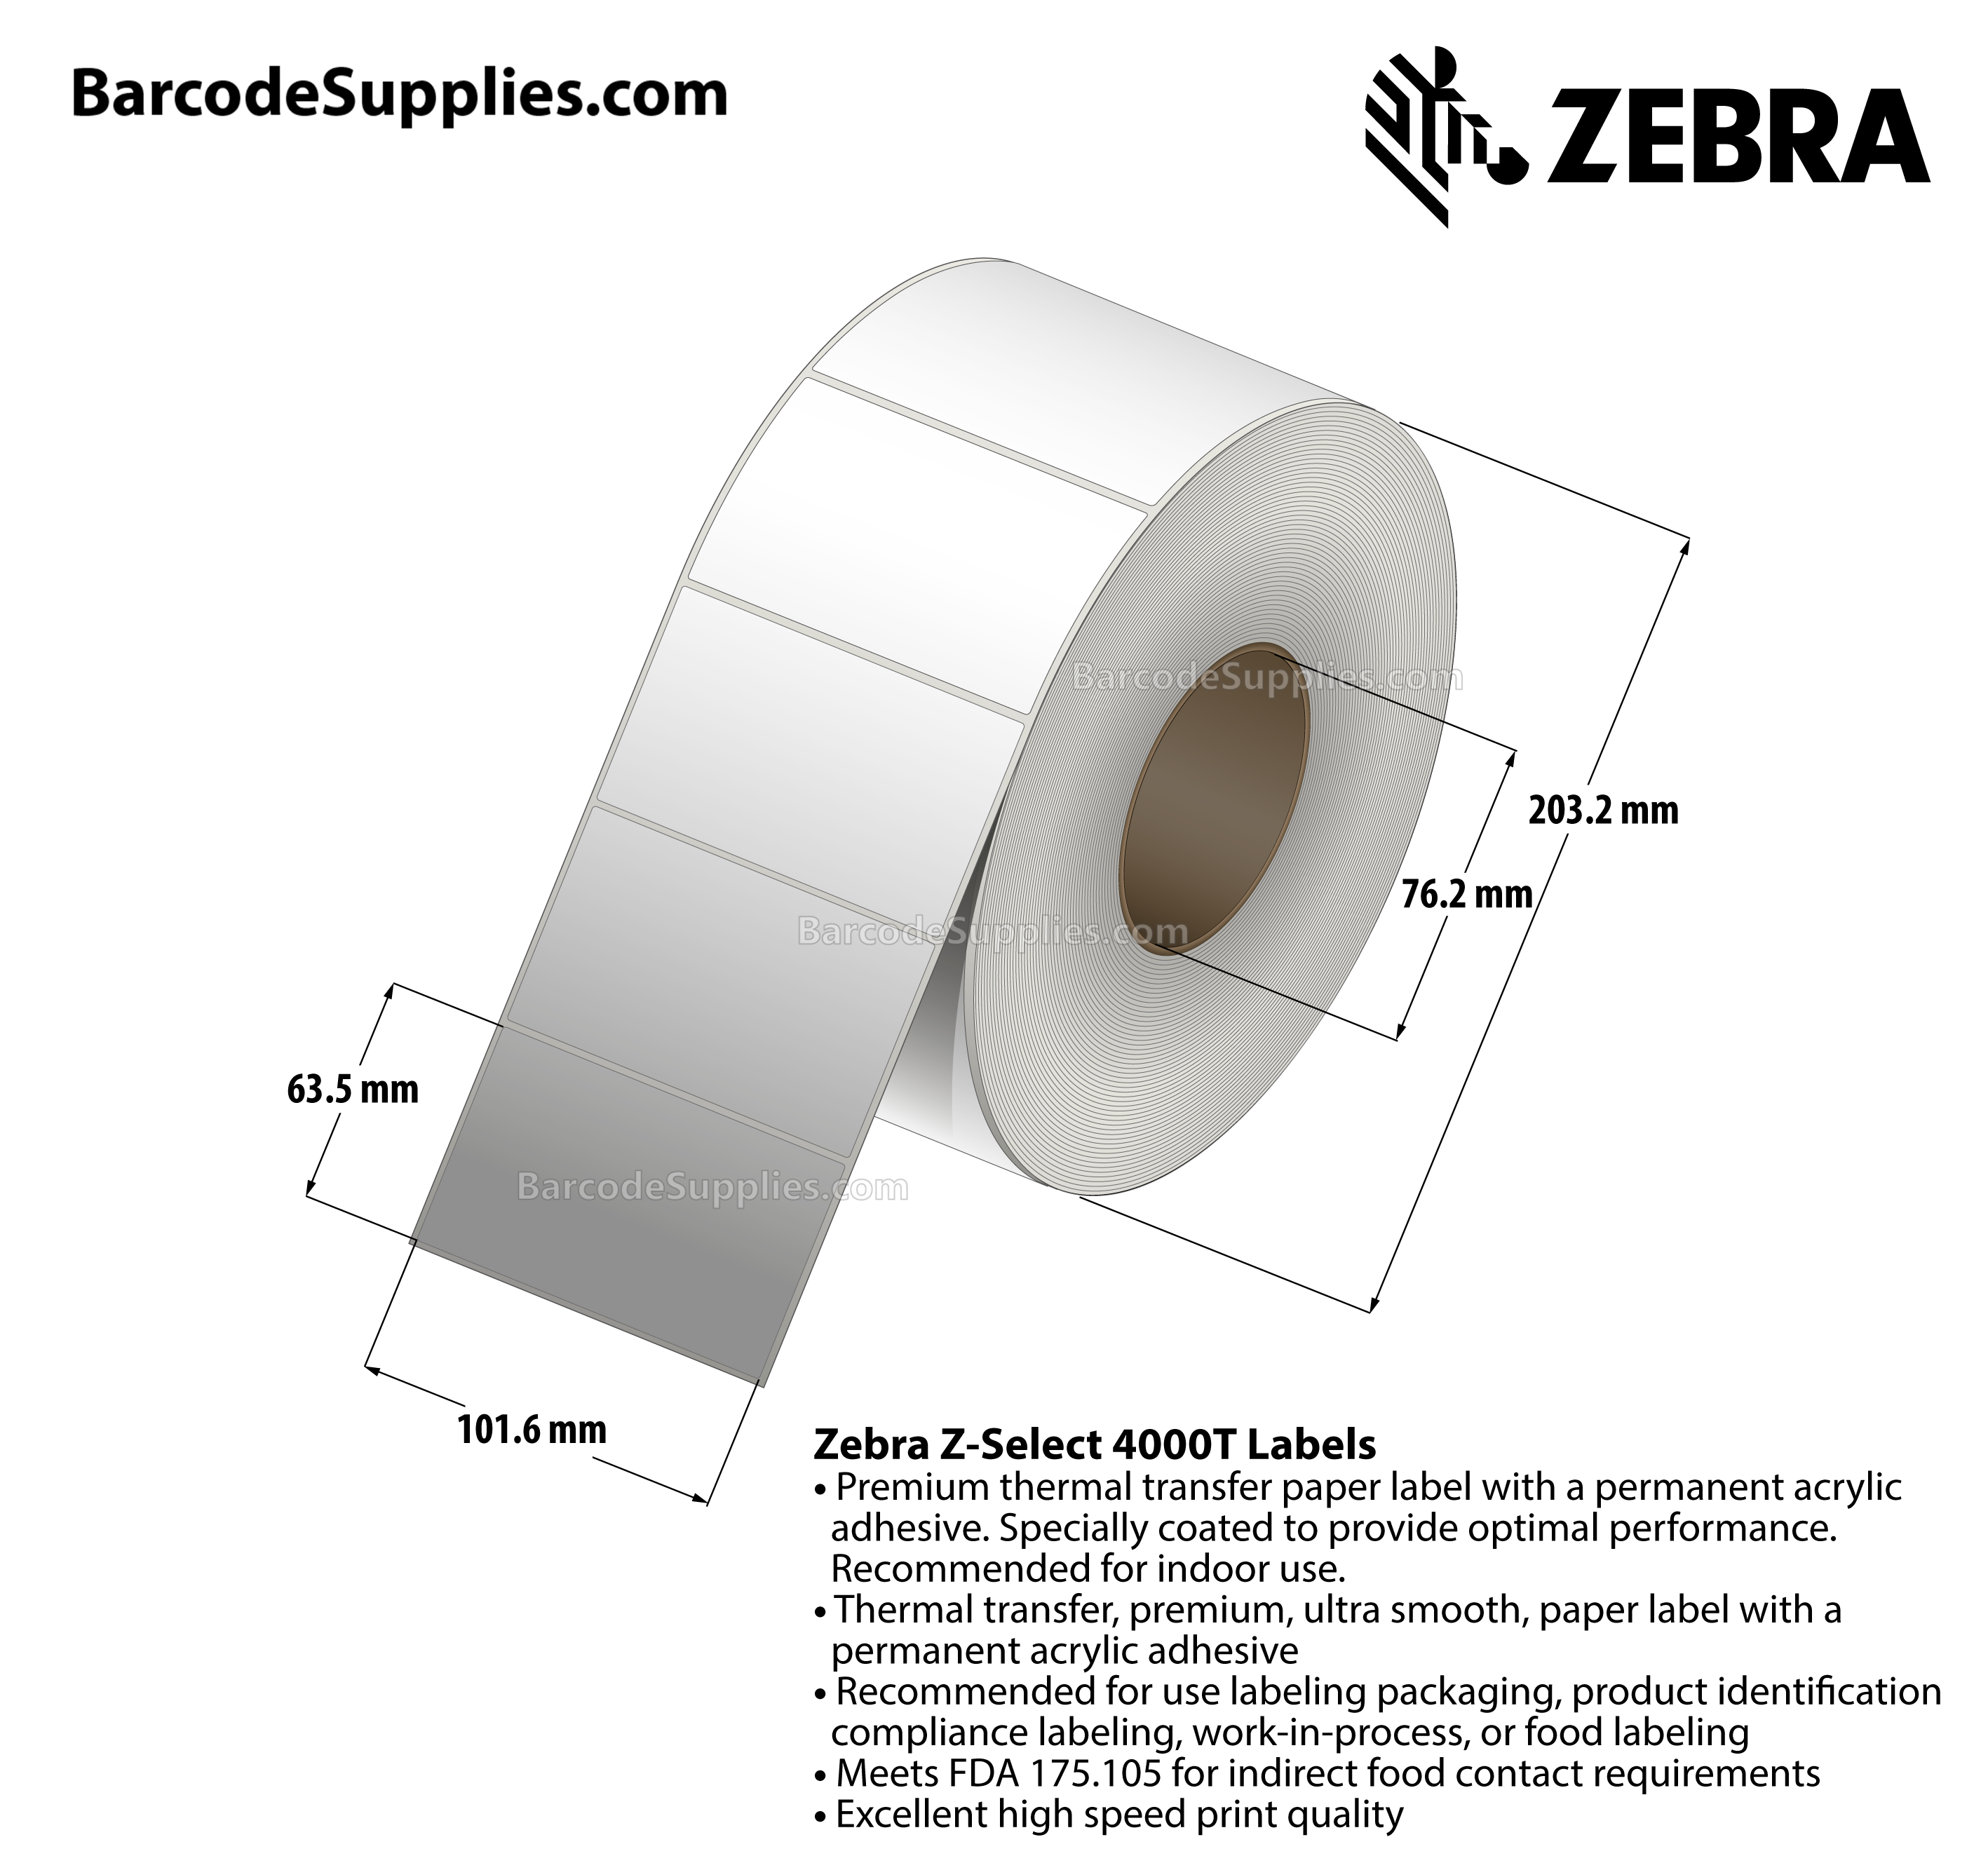 4 x 2.5 Thermal Transfer White Z-Select 4000T Labels With Permanent Adhesive - Not Perforated - 2220 Labels Per Roll - Carton Of 4 Rolls - 8880 Labels Total - MPN: 72290